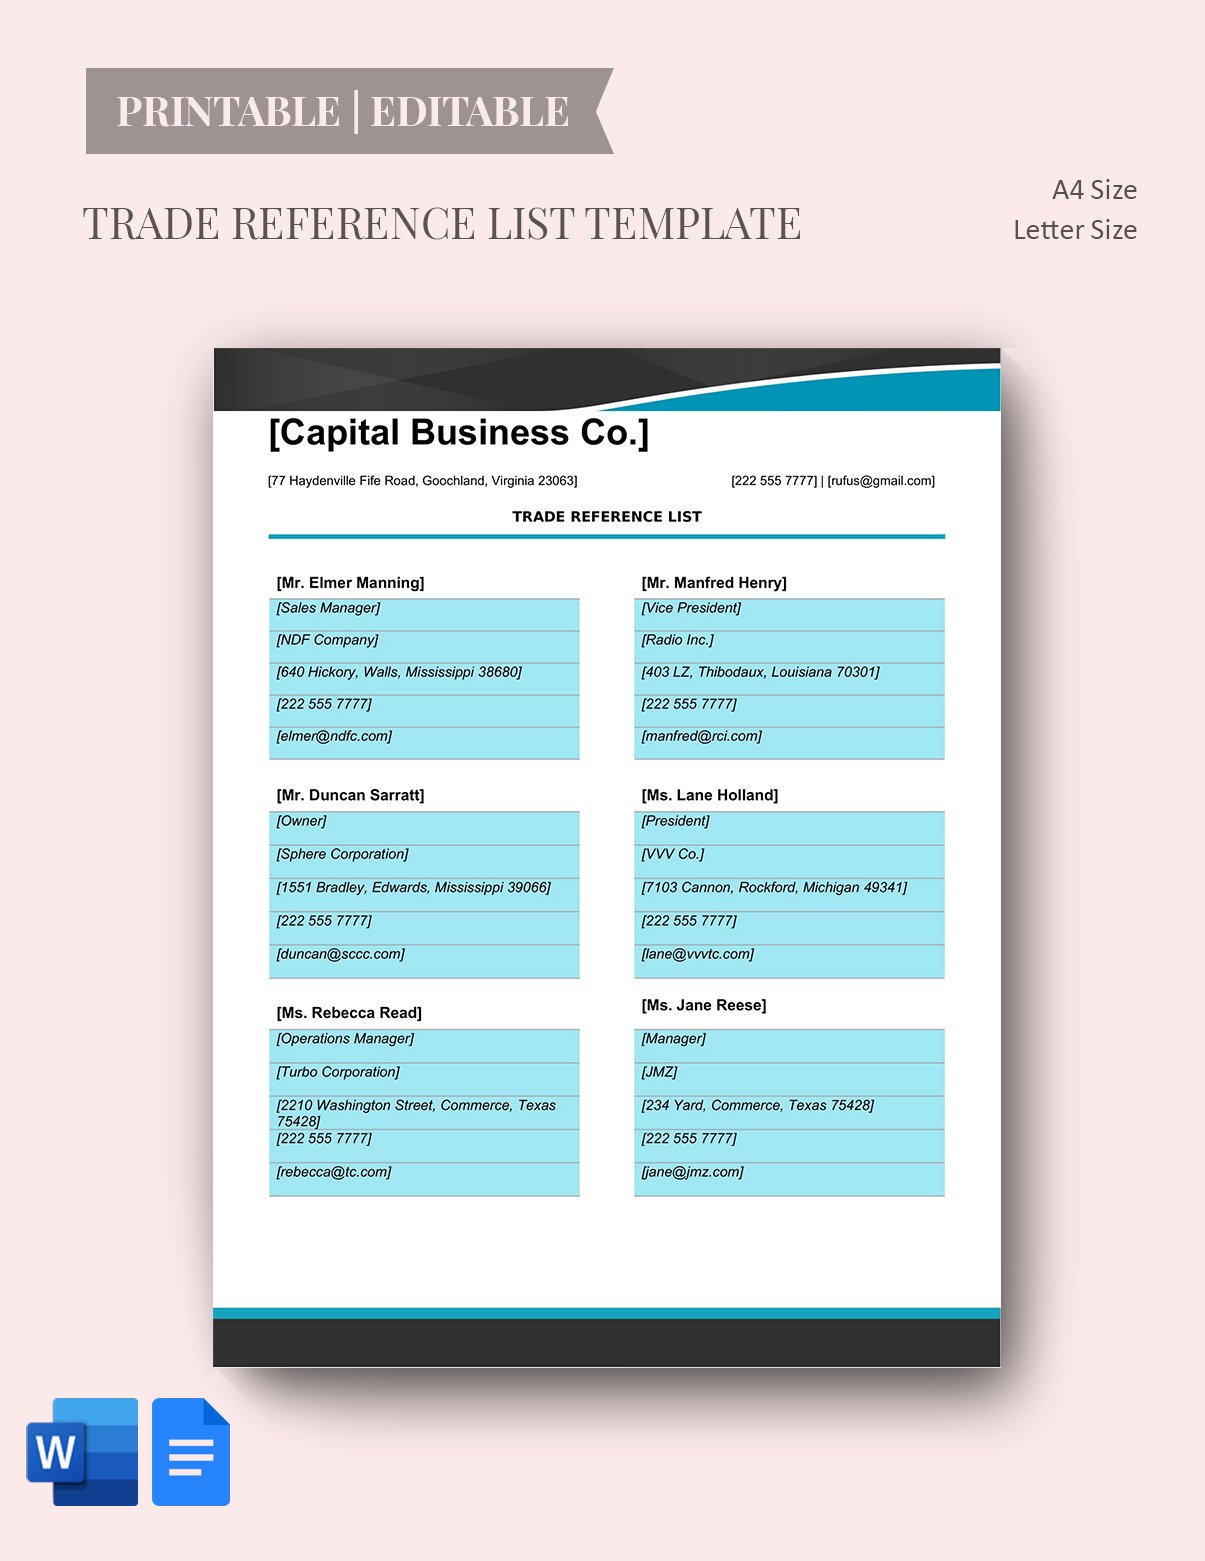 Trade Reference List Template